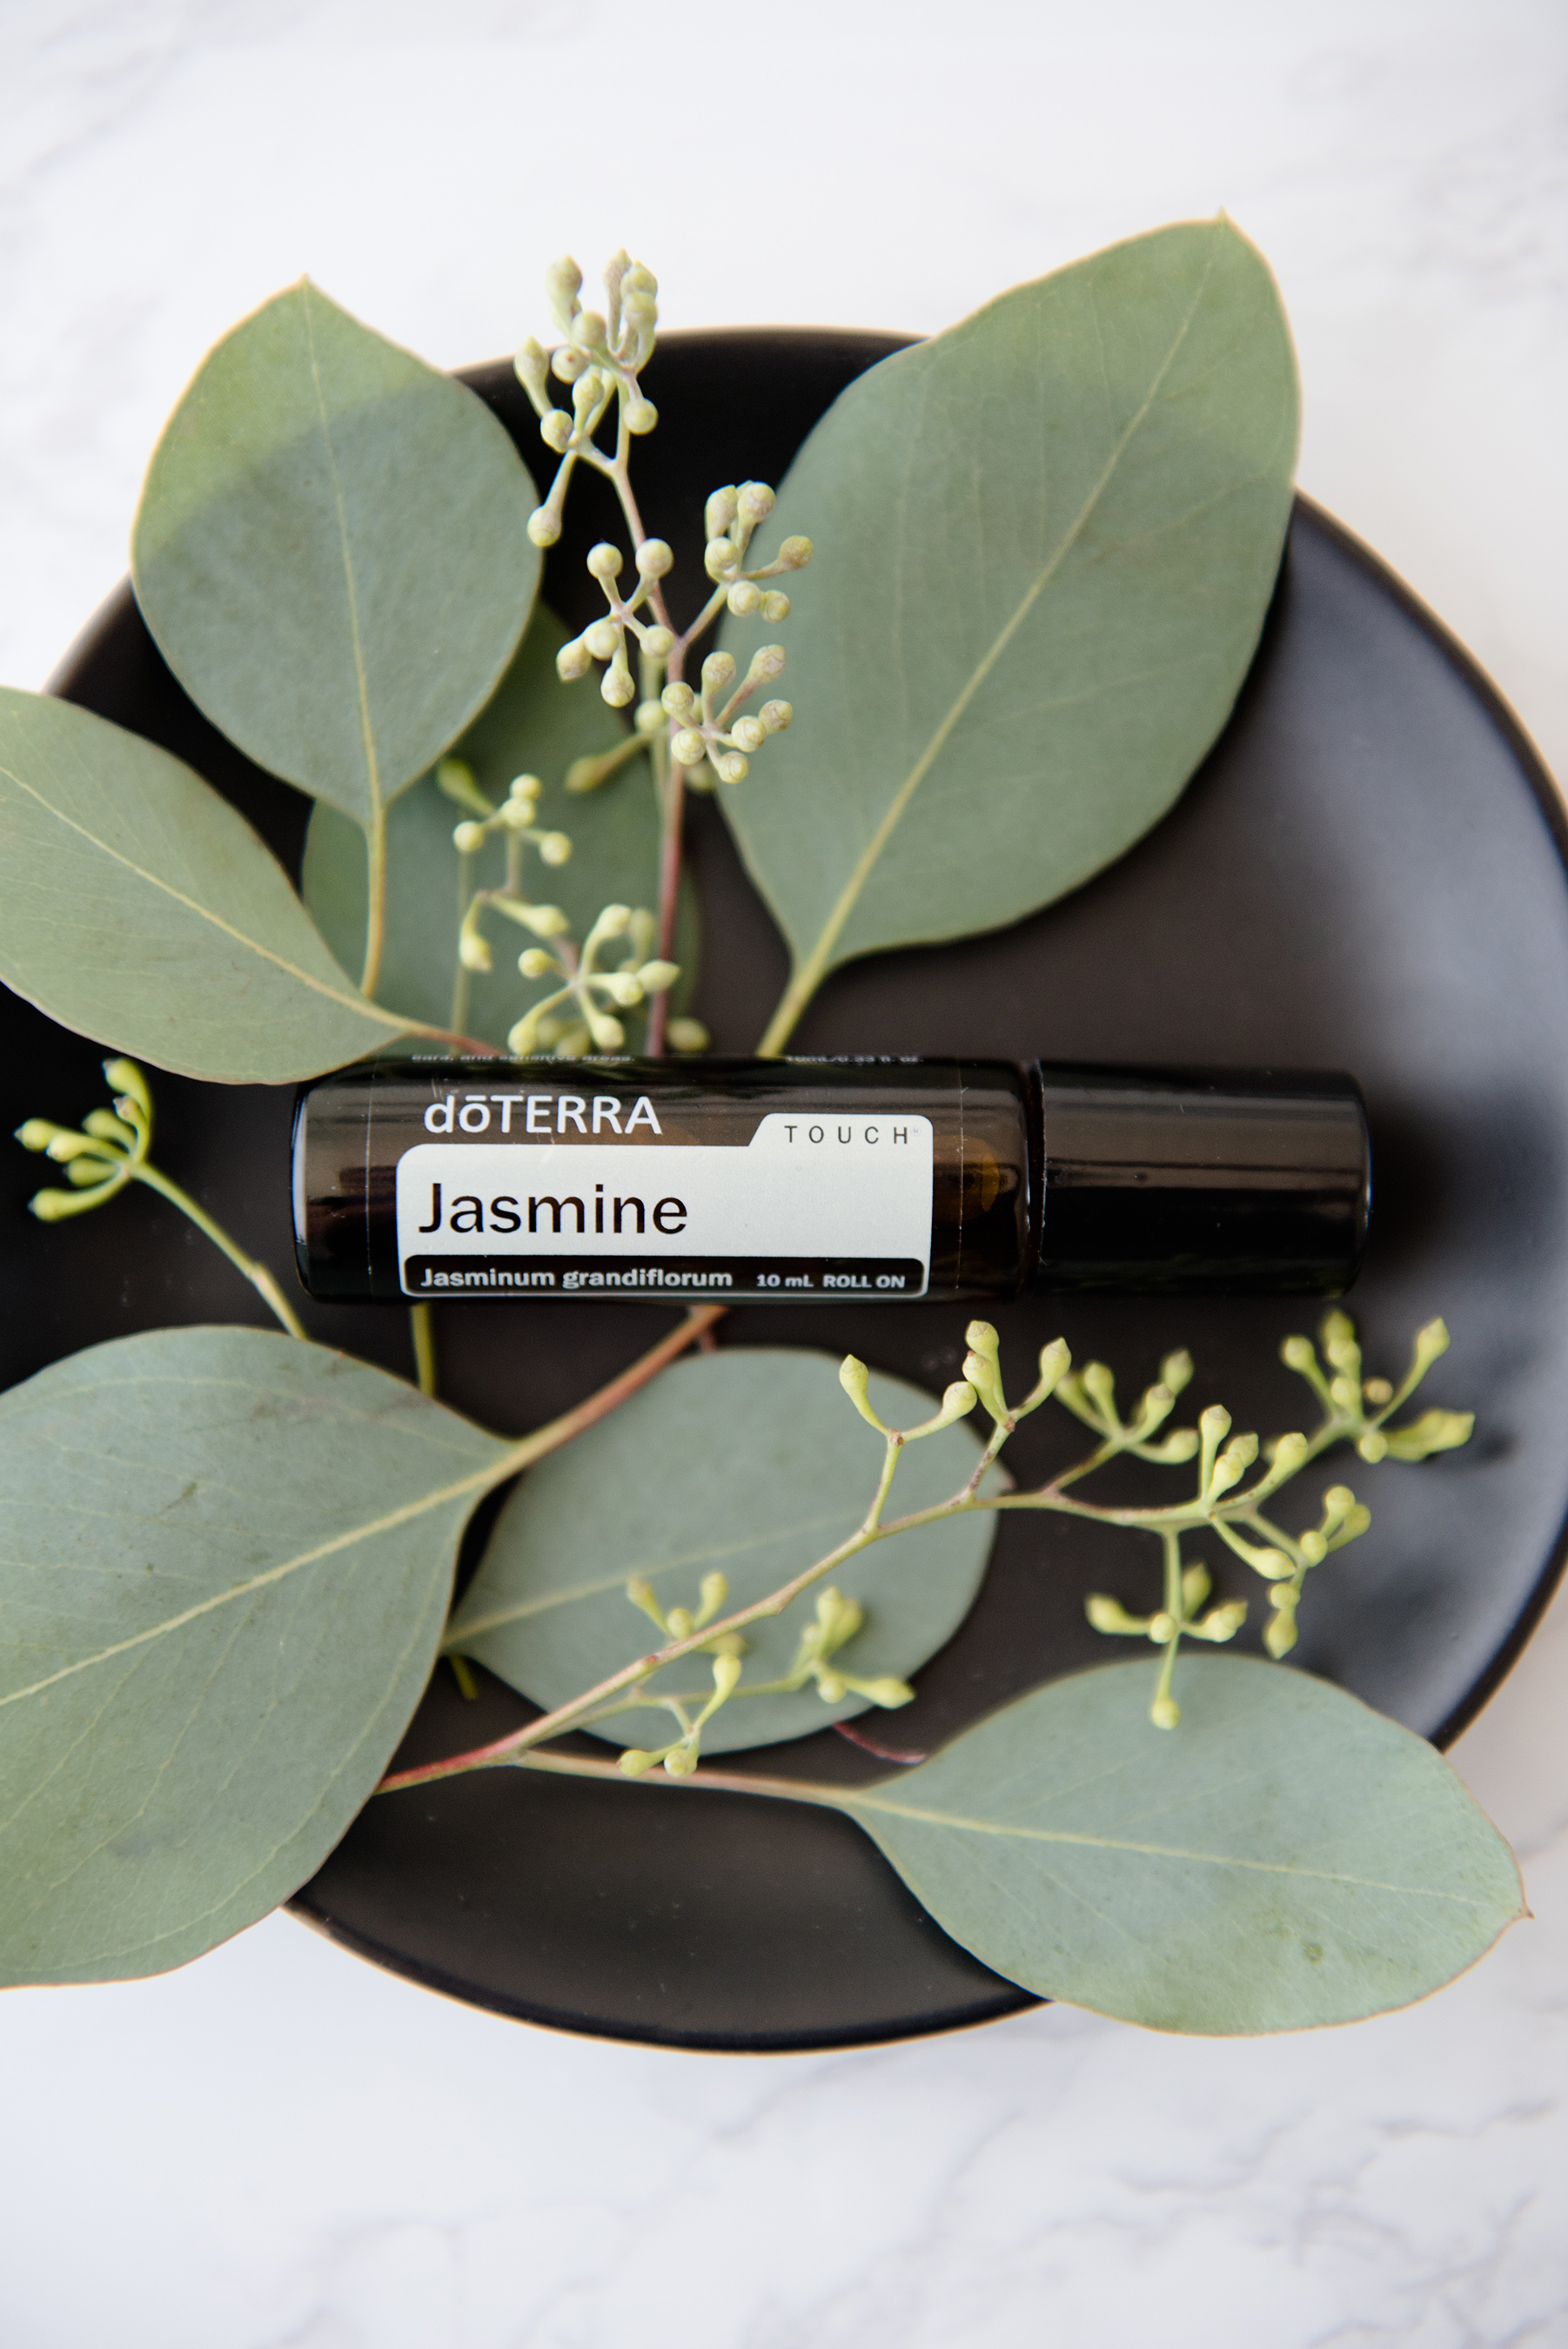 Jasmine, regarded as the “King of Flowers,” uplifts mood and promotes a positive outlook.